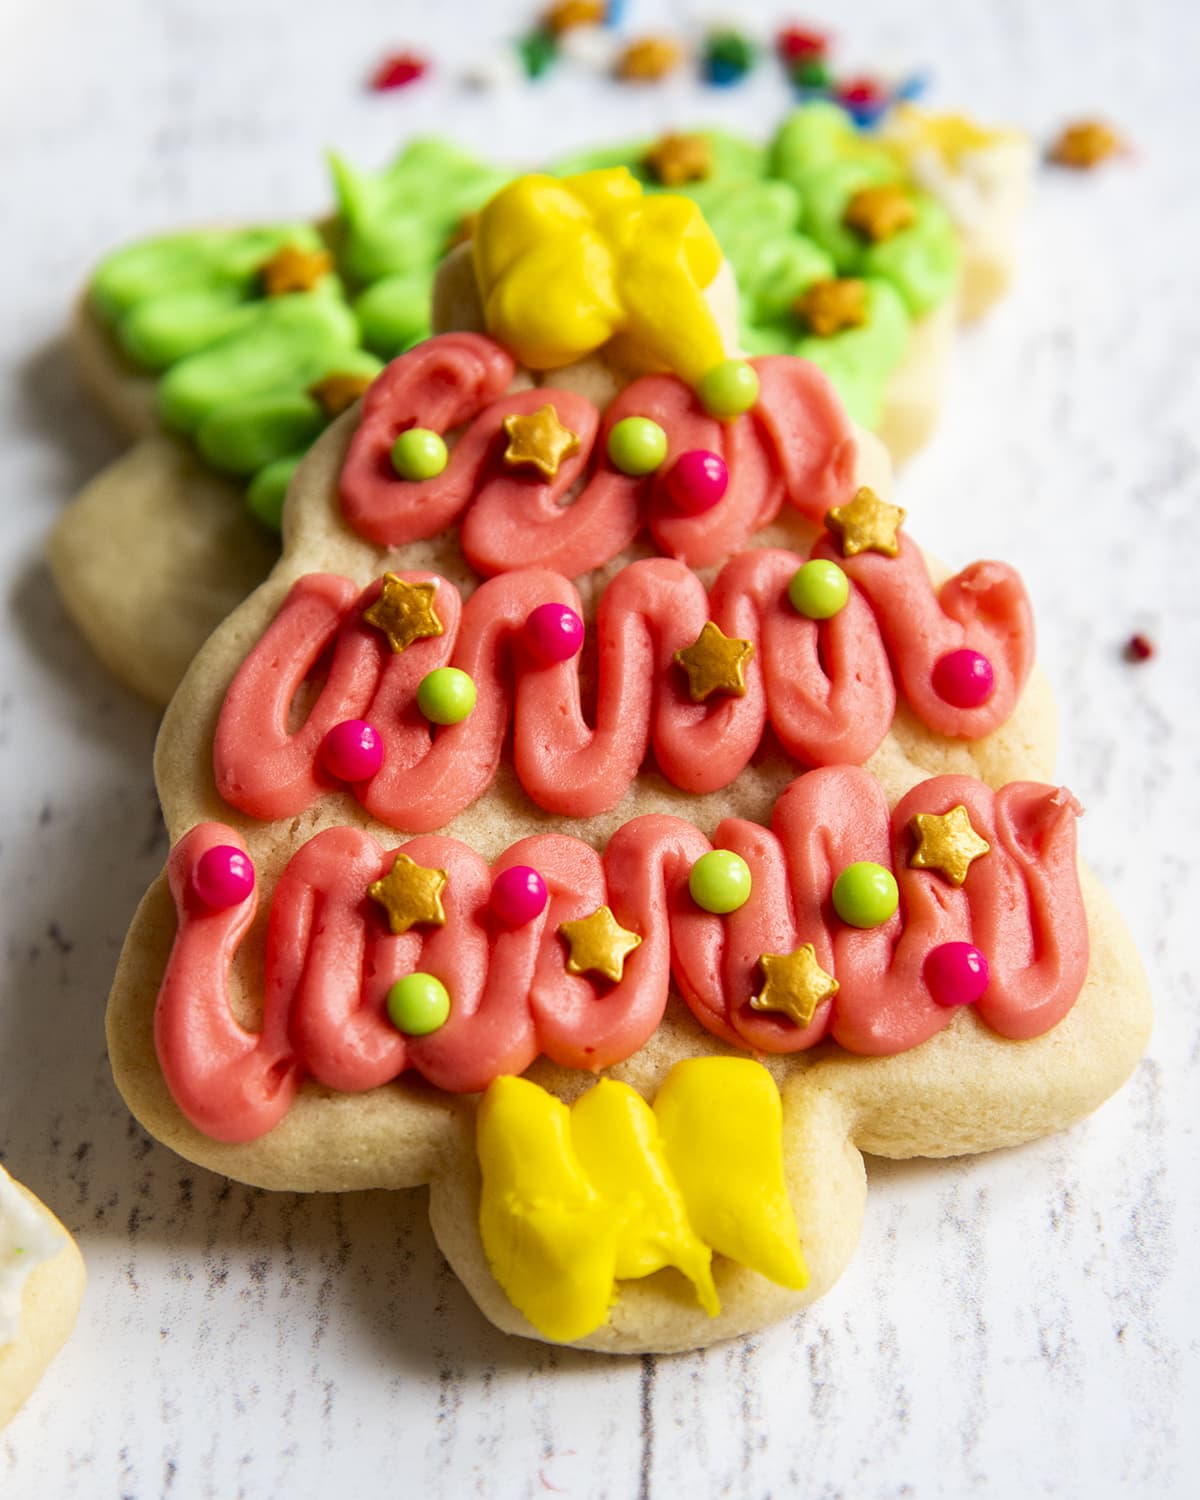 A pink decorated Christmas tree sugar cookie.